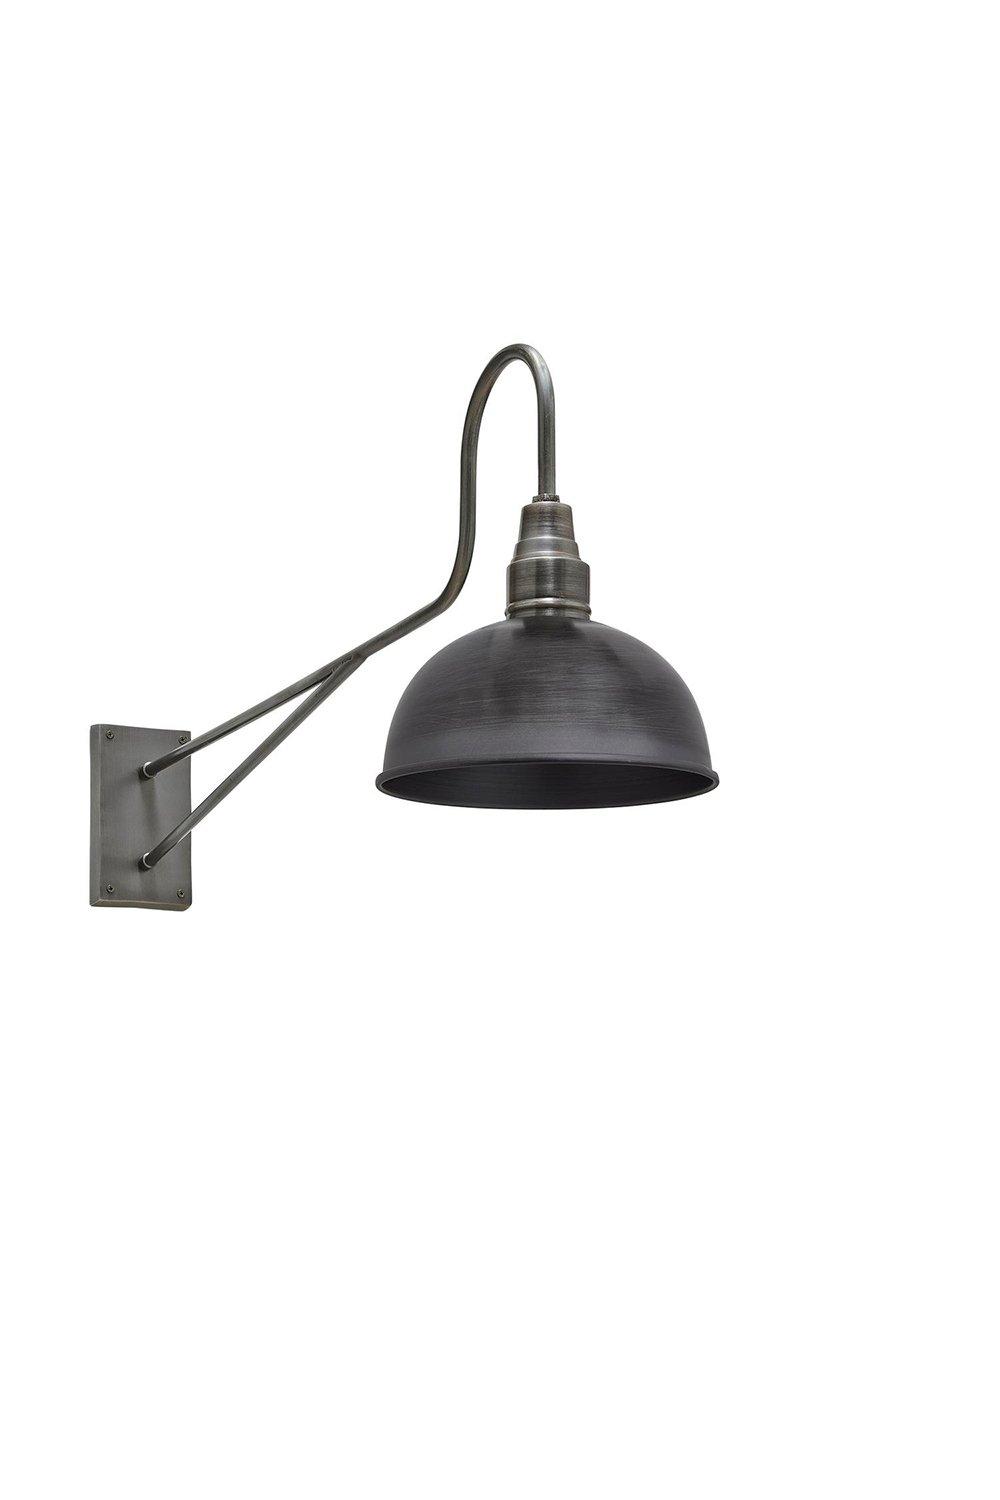 Long Arm Dome Wall Light, 8 Inch, Pewter, Pewter Holder